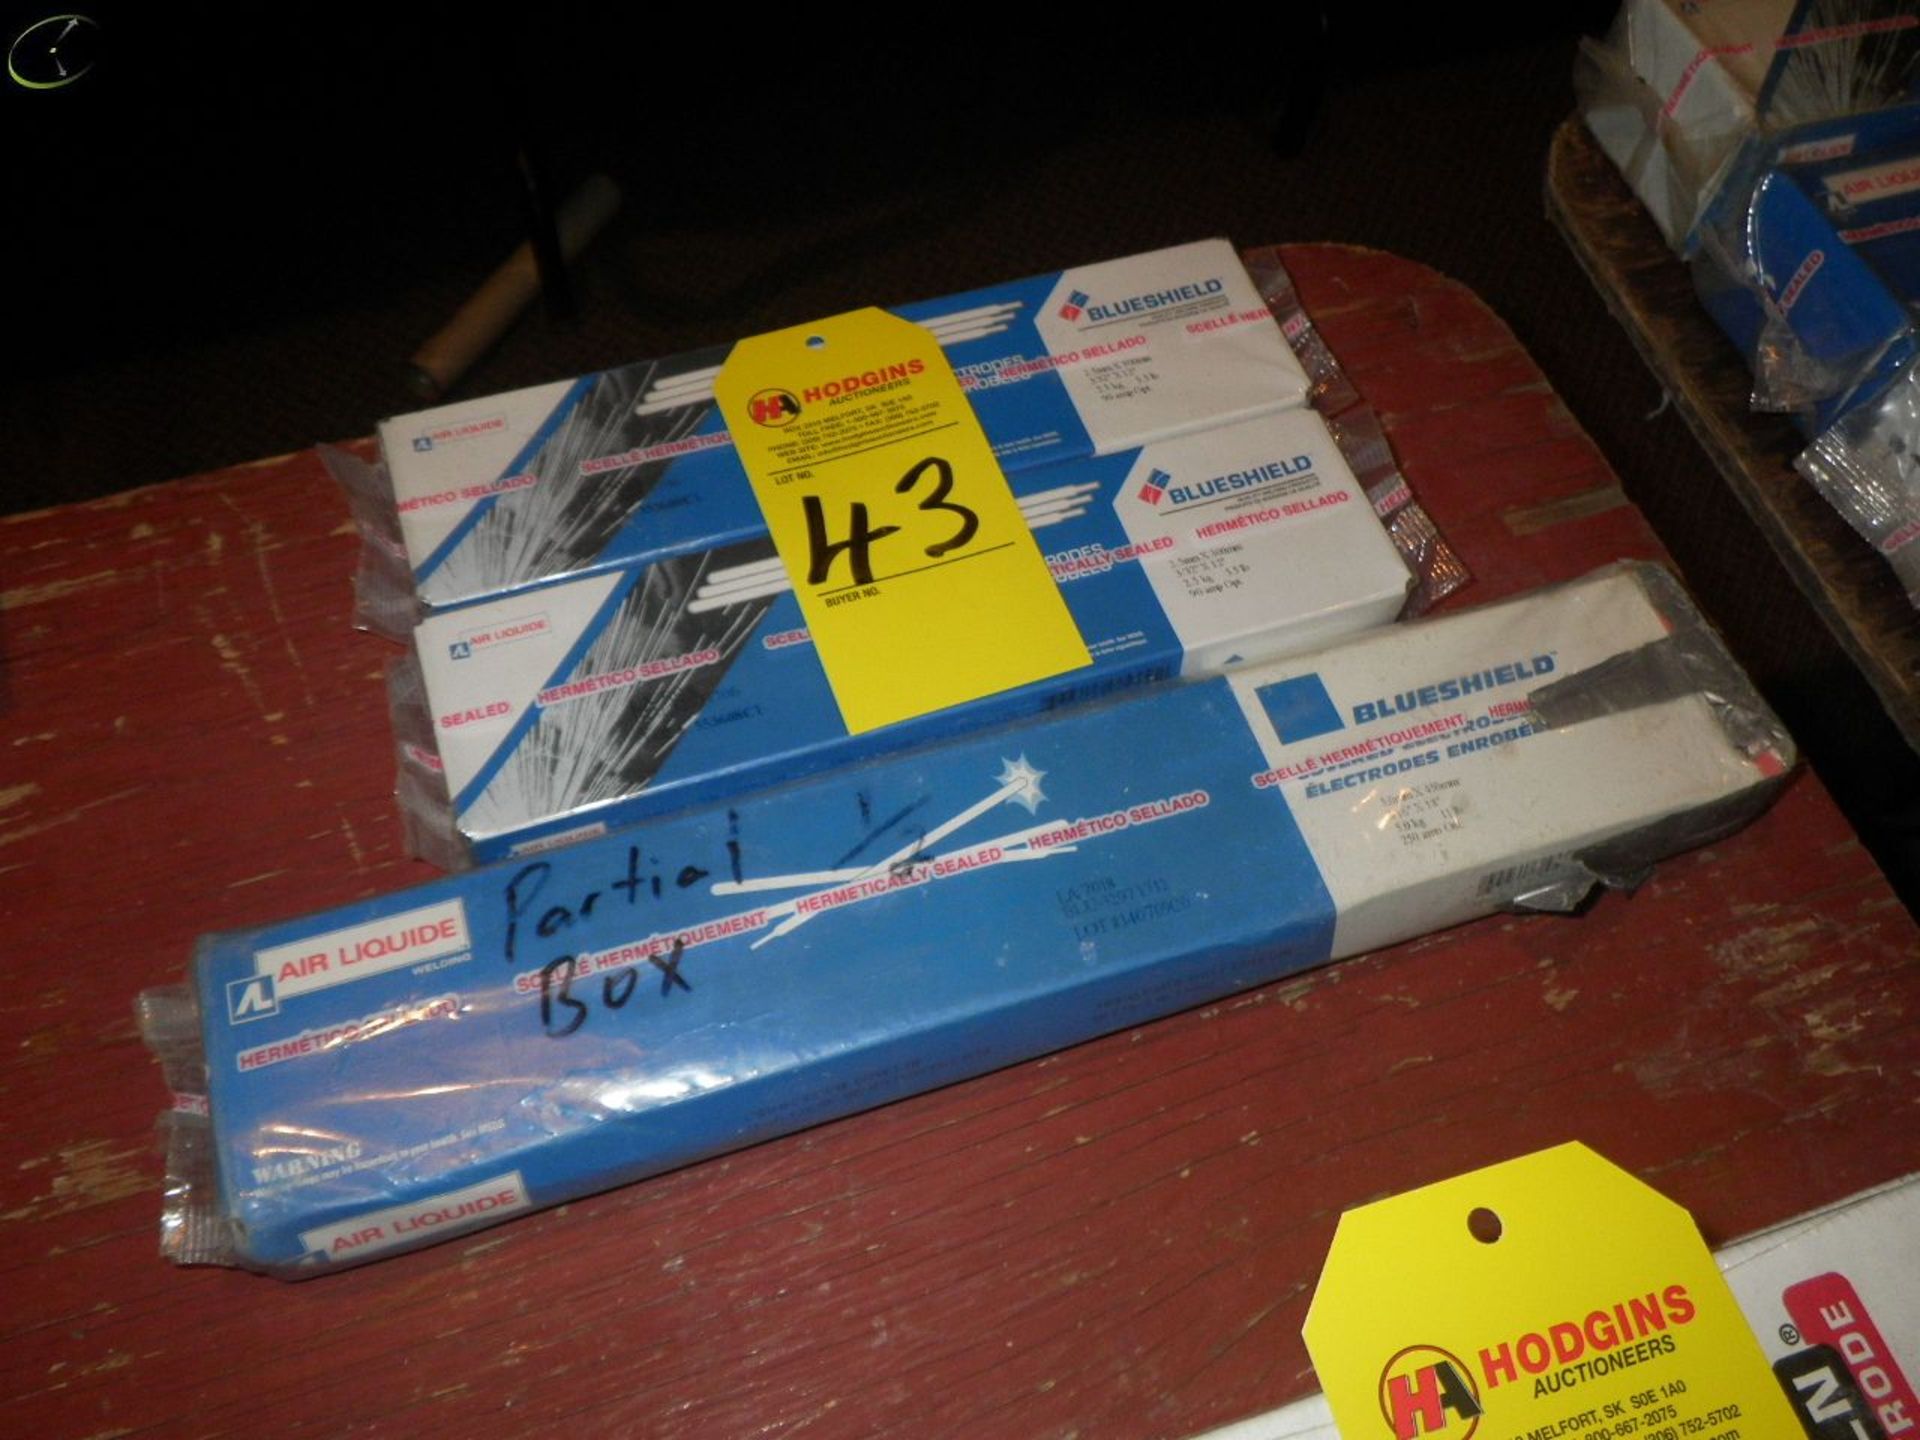 TWO Boxes Of BLUESHIELD 3/32X12'' 7018 Welding Rods, Partial Box Of 3/16''x18'' 7018 Welding Rod.